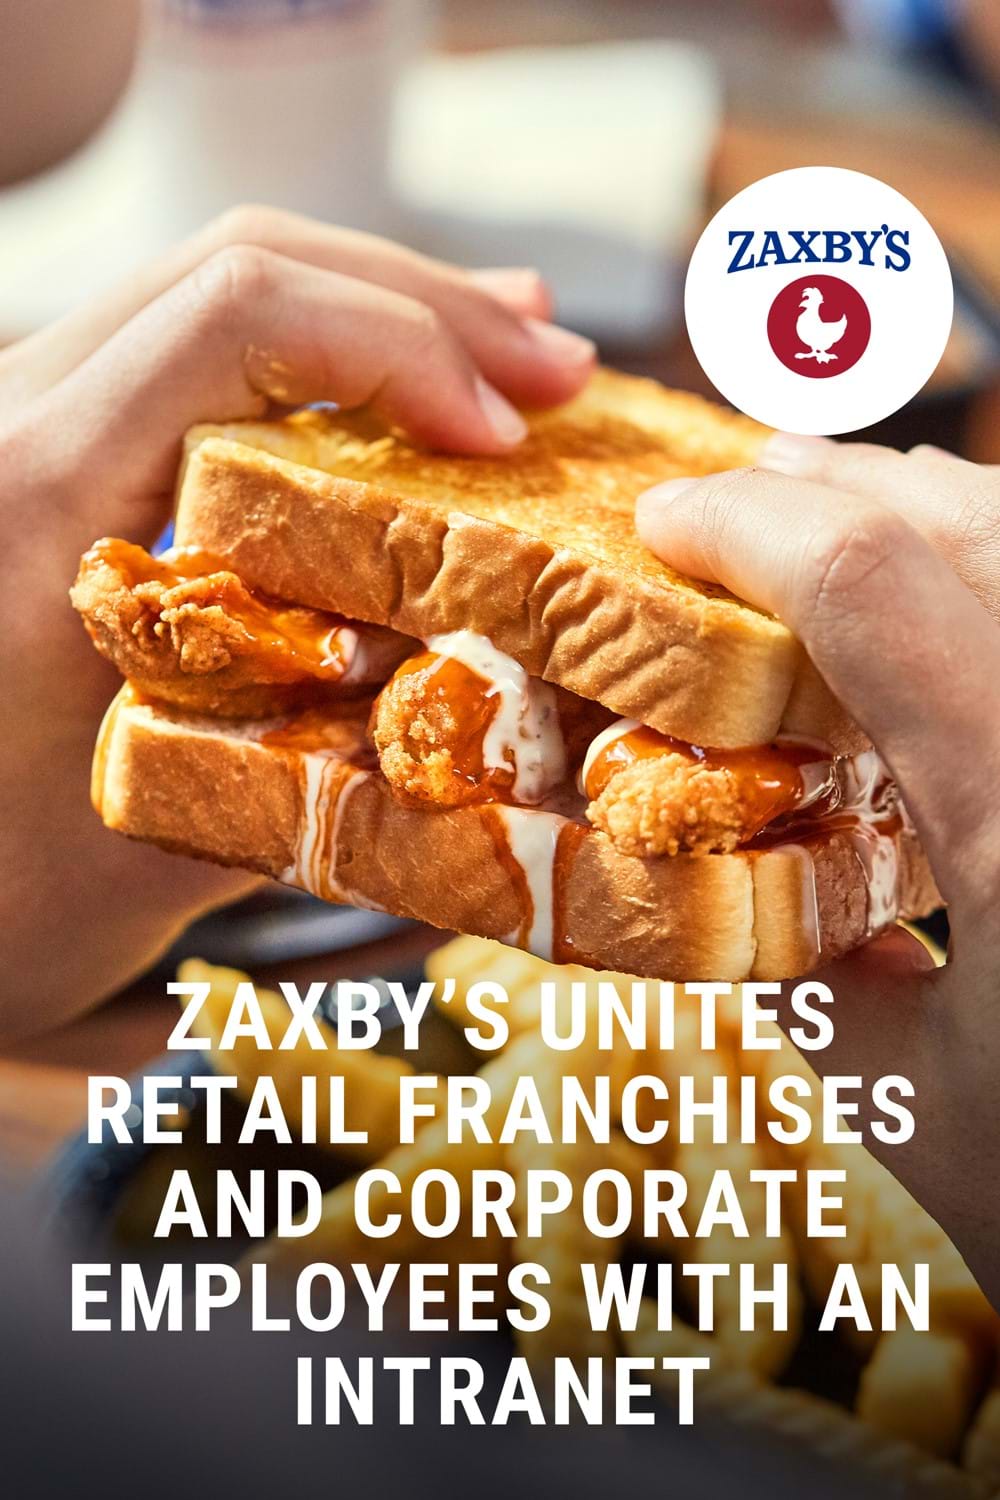 'Zaxby’s unites retail franchises and corporate employees with an intranet' case study flat pages